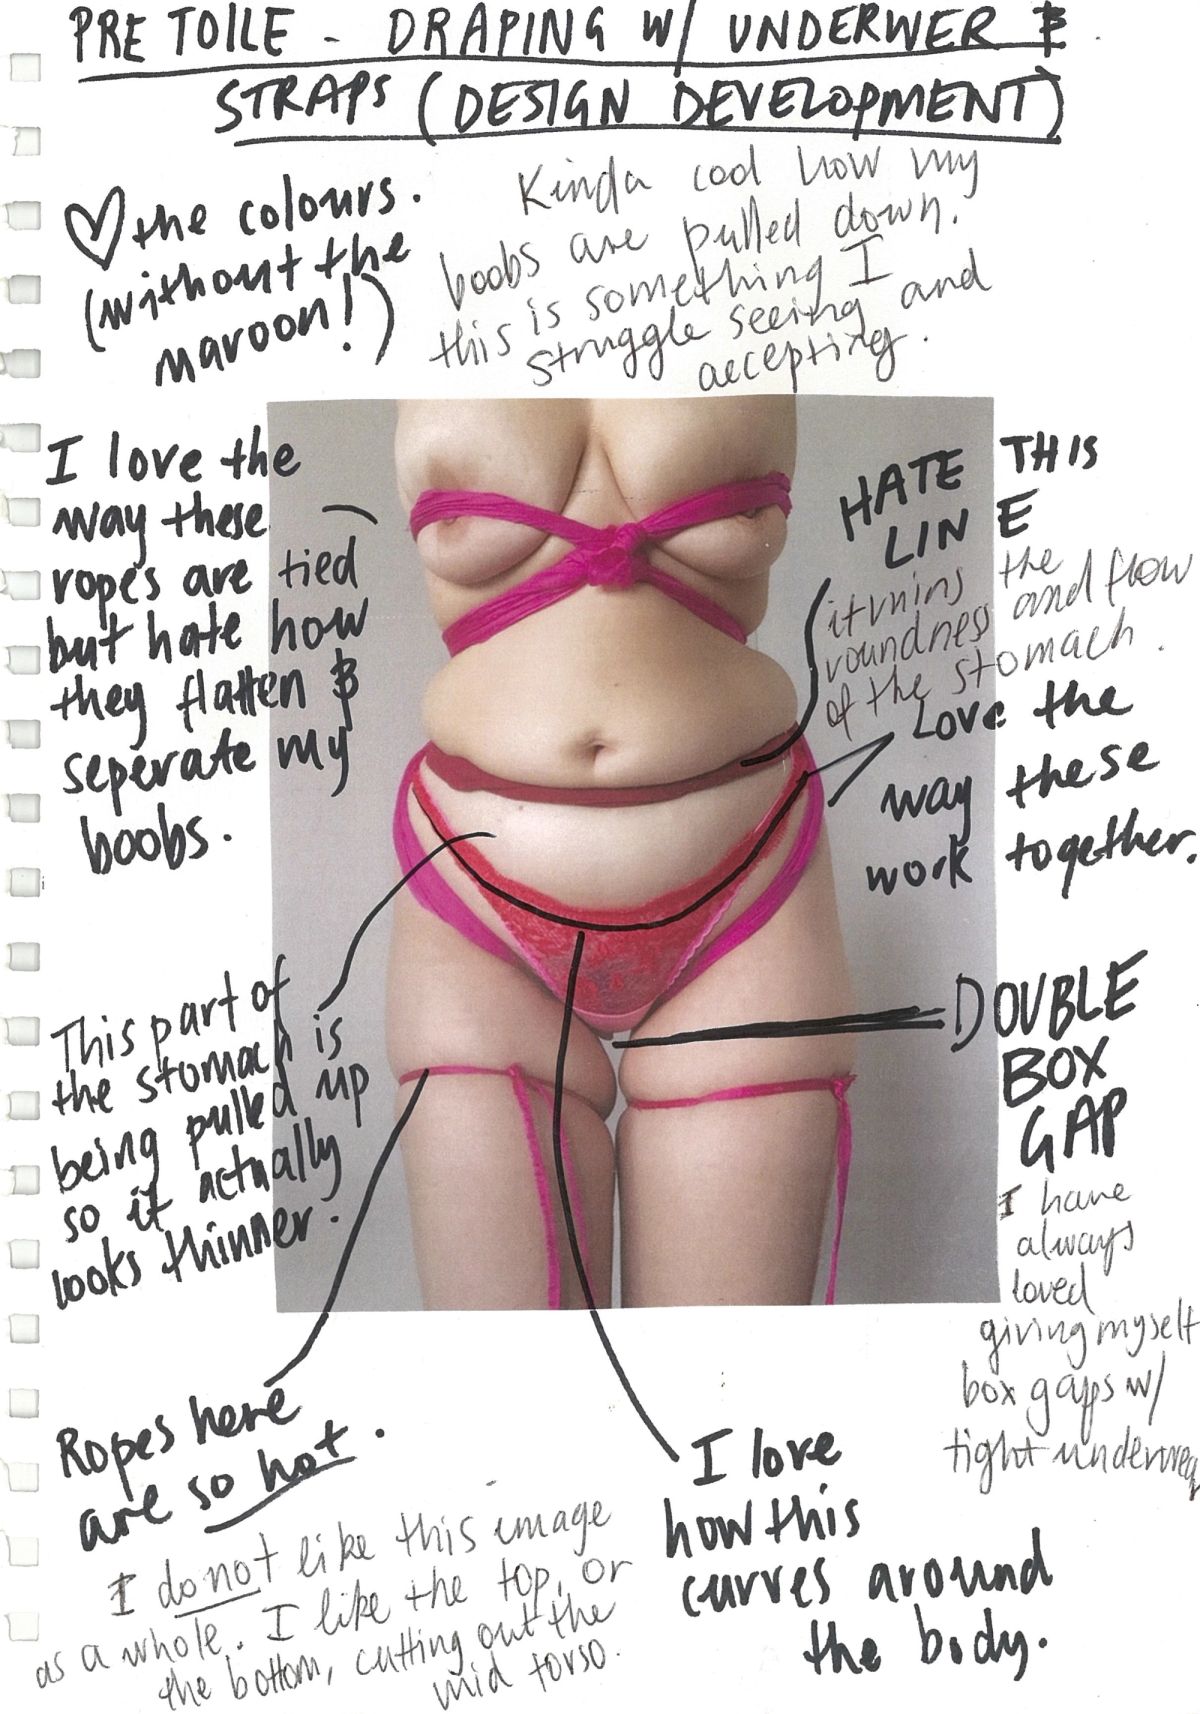 The era of body-positive lingerie is here